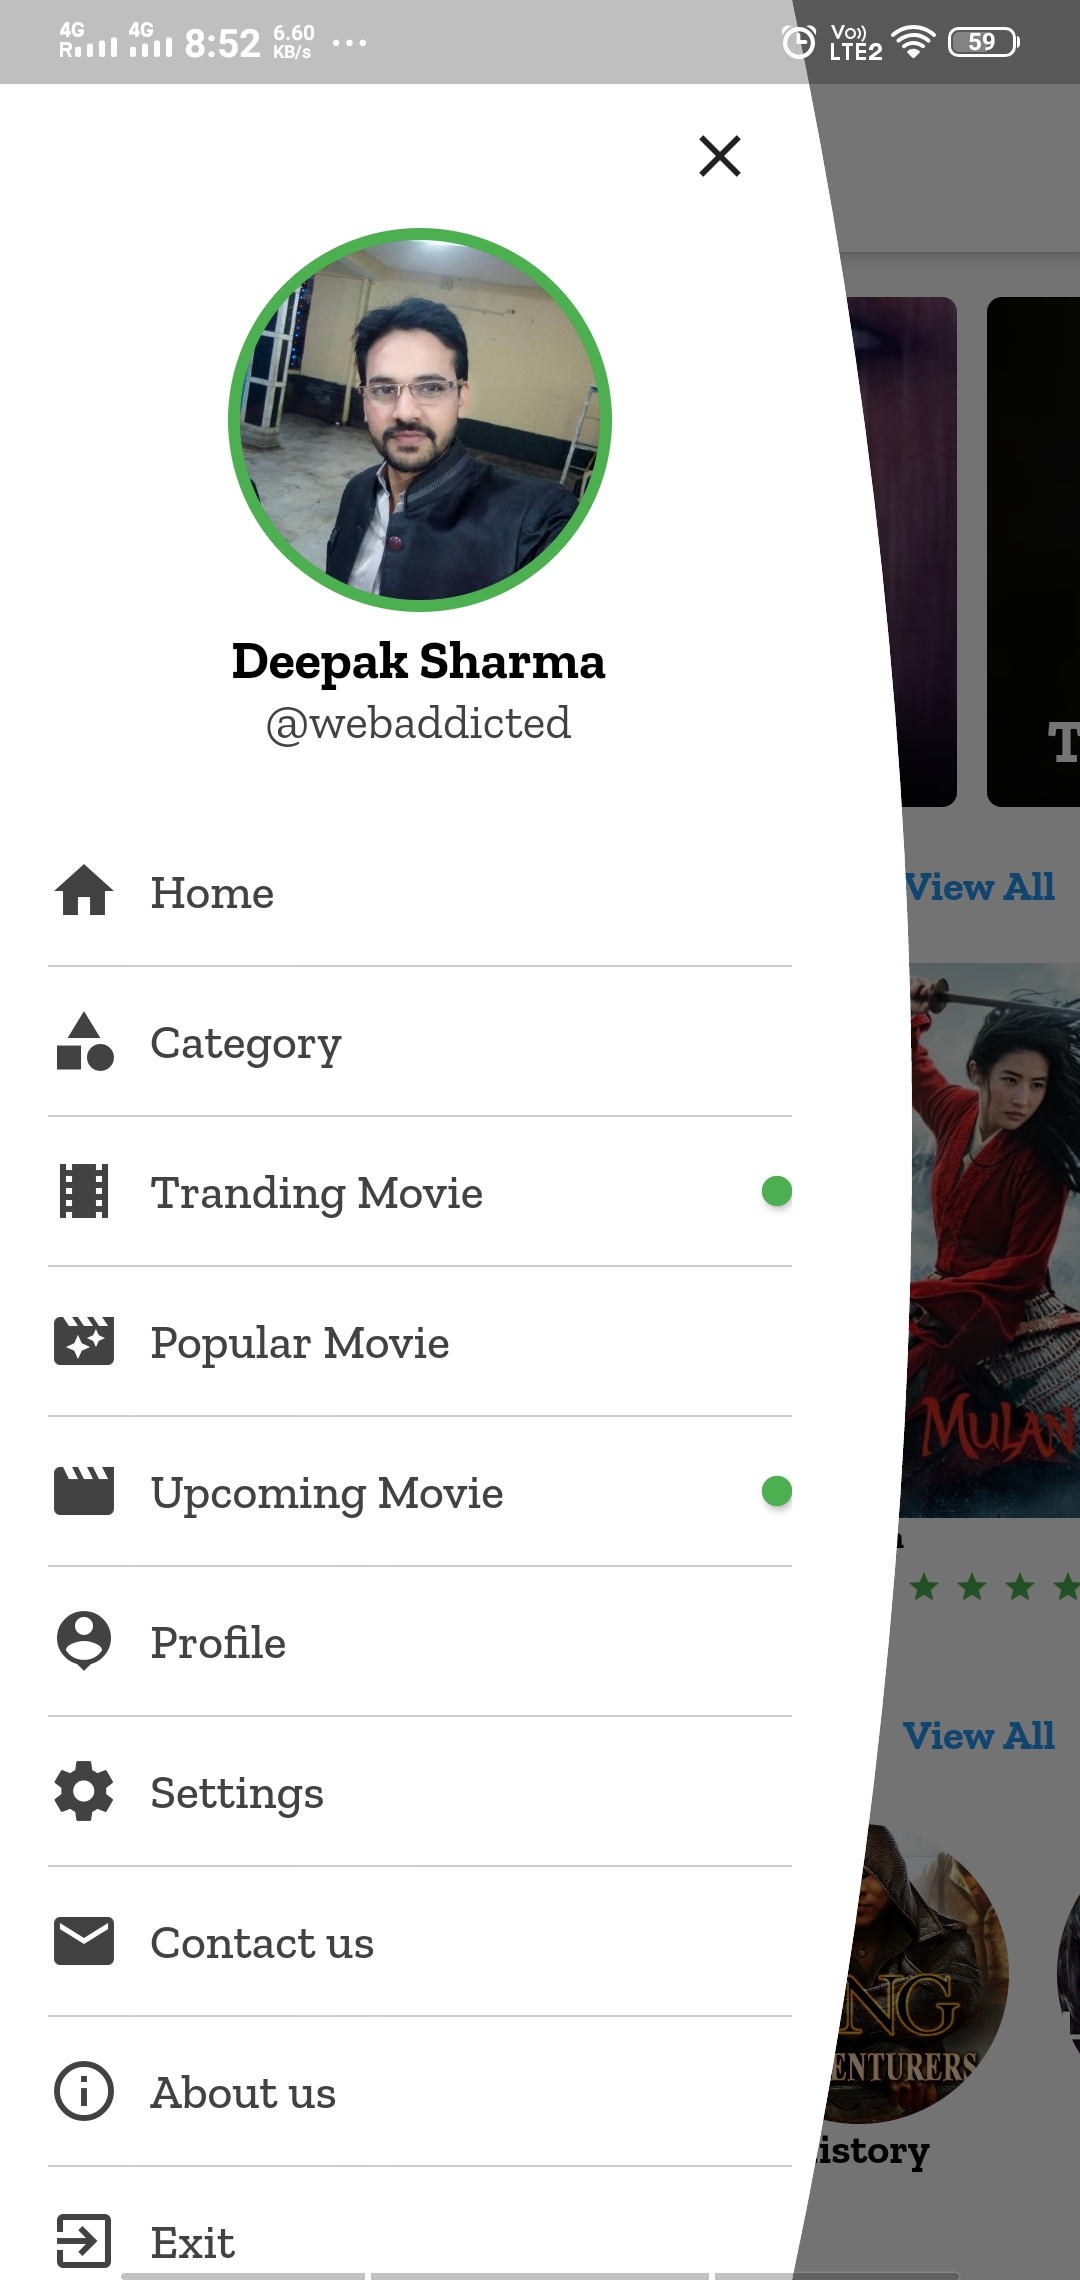 A fetch latest upcomming movies app with flutter